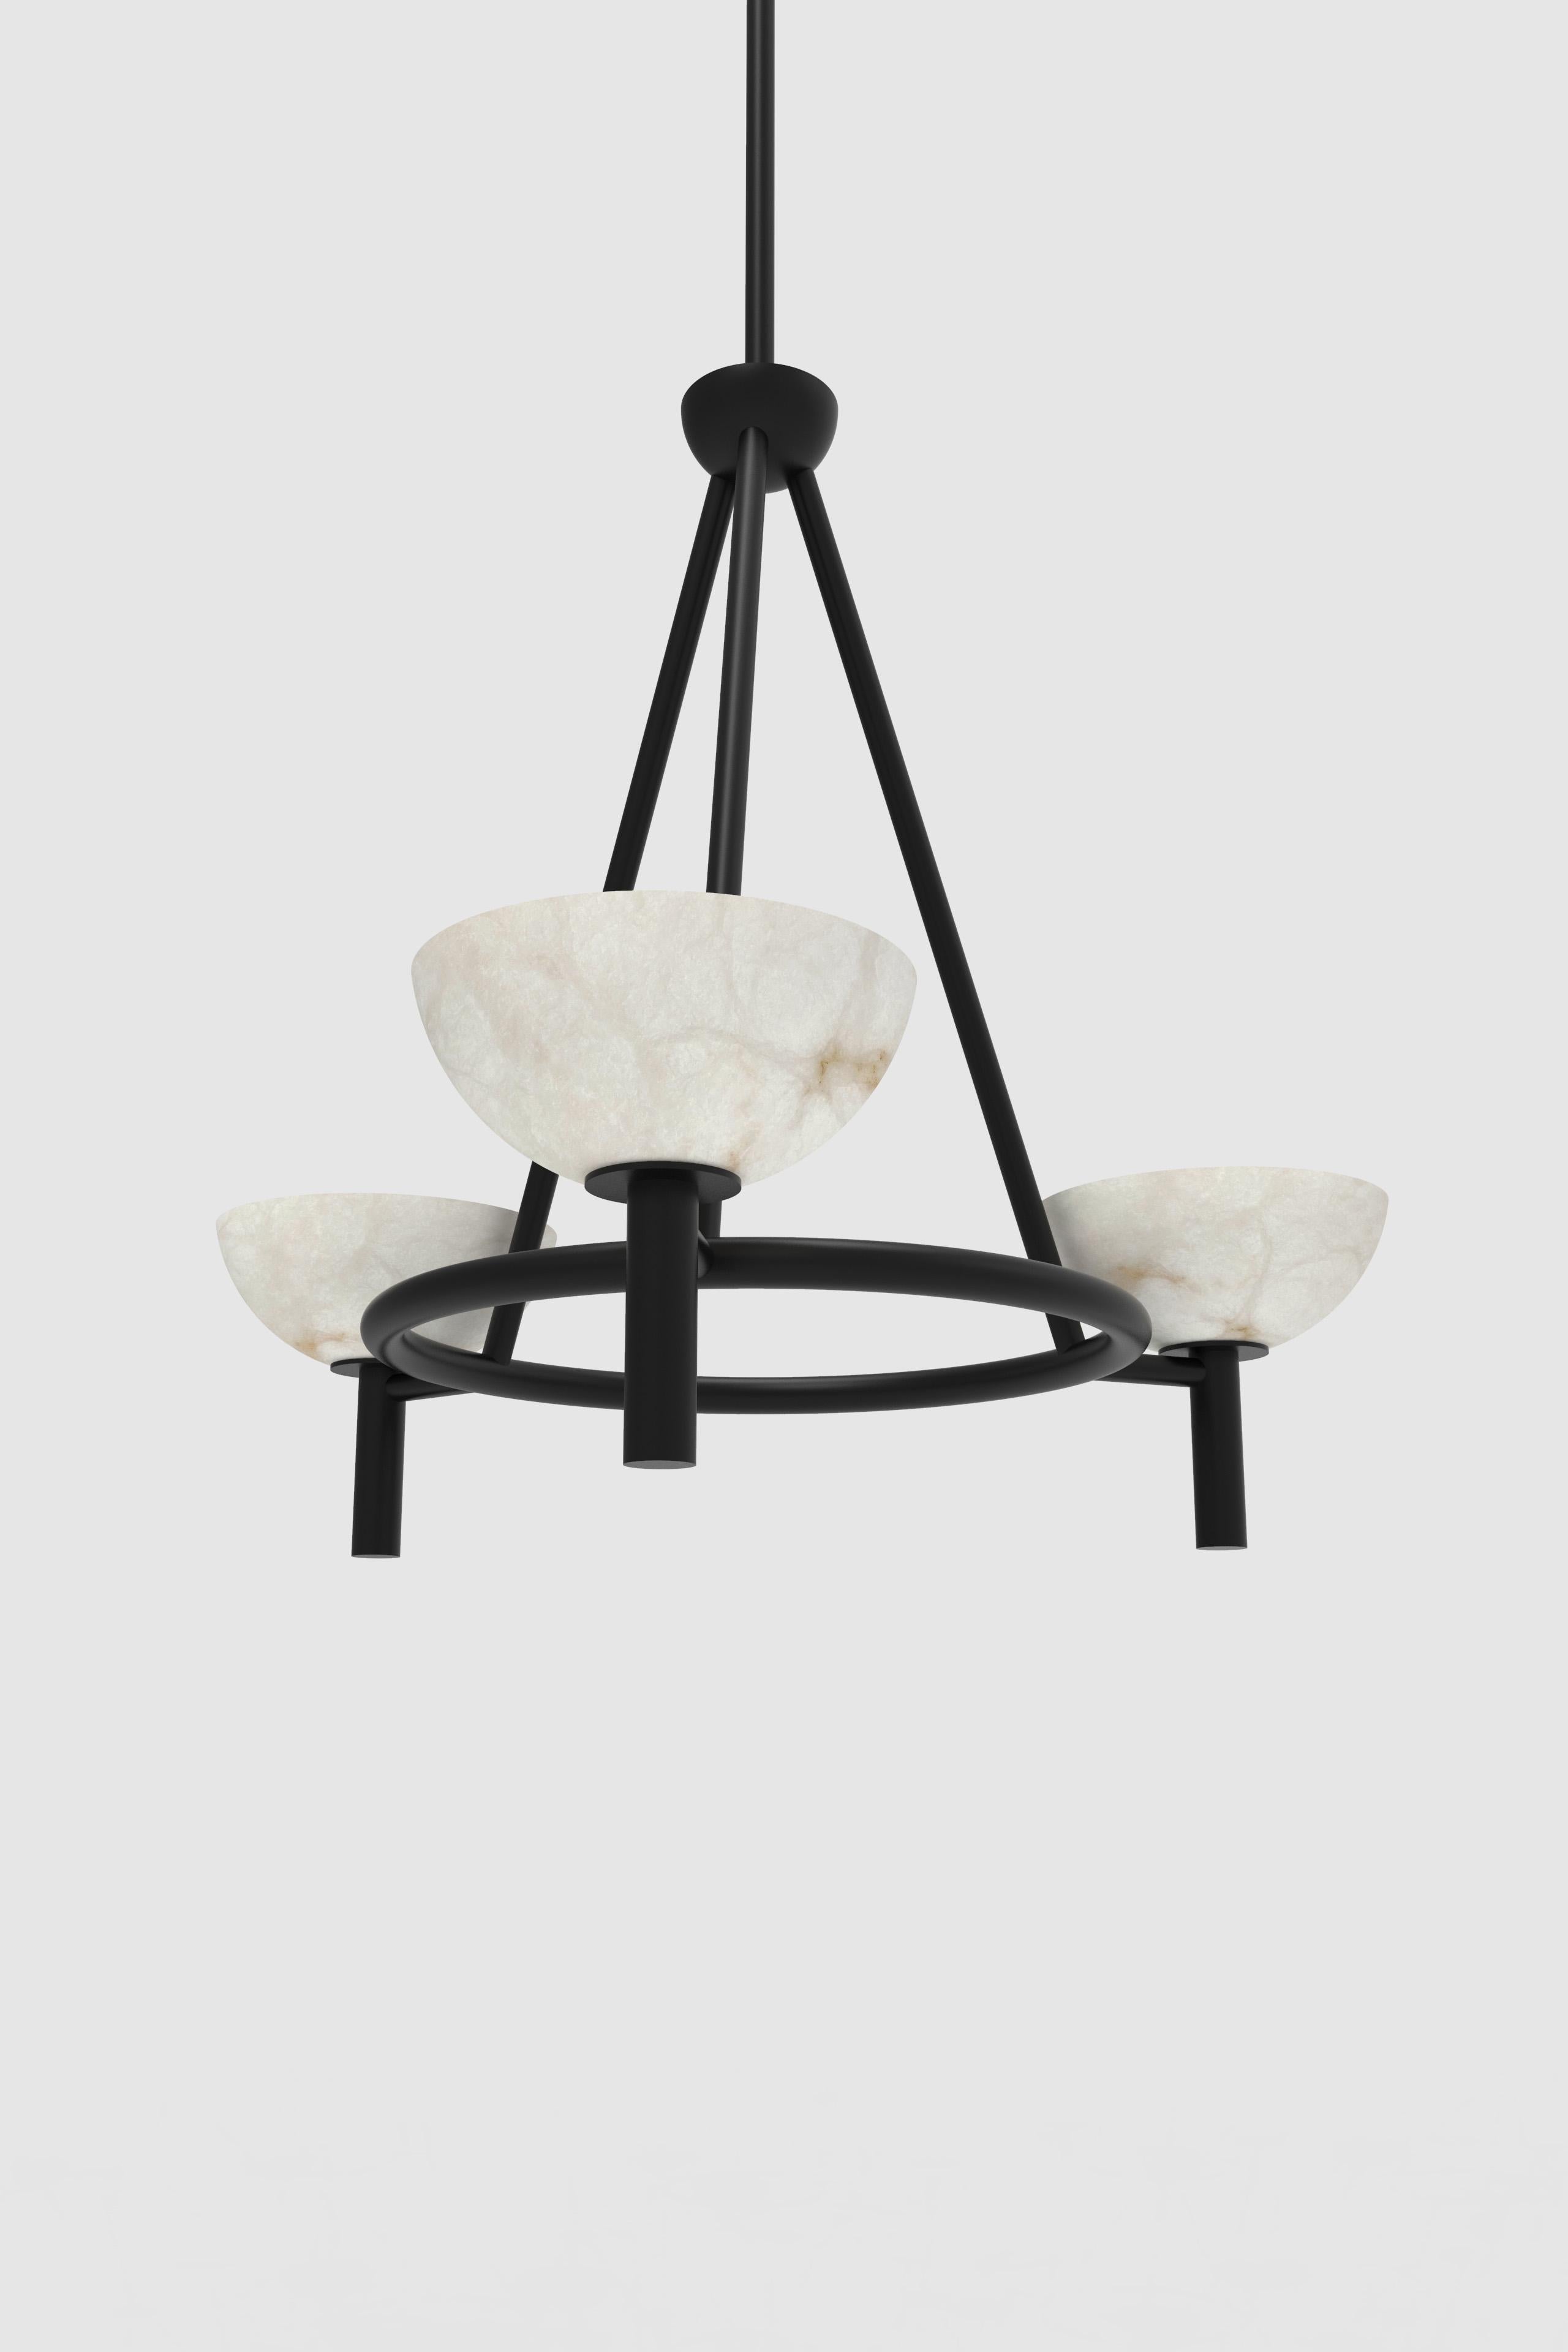 Orphan work 200A Chandelier BLK
Shown in alabaster with blackened brass
Available in brushed brass and blackened brass
Measures: 34” diameter x 24” height
Height to order
UL approved
Holds (3) 60W candelabra bulb
must use LED bulb
Uplight with